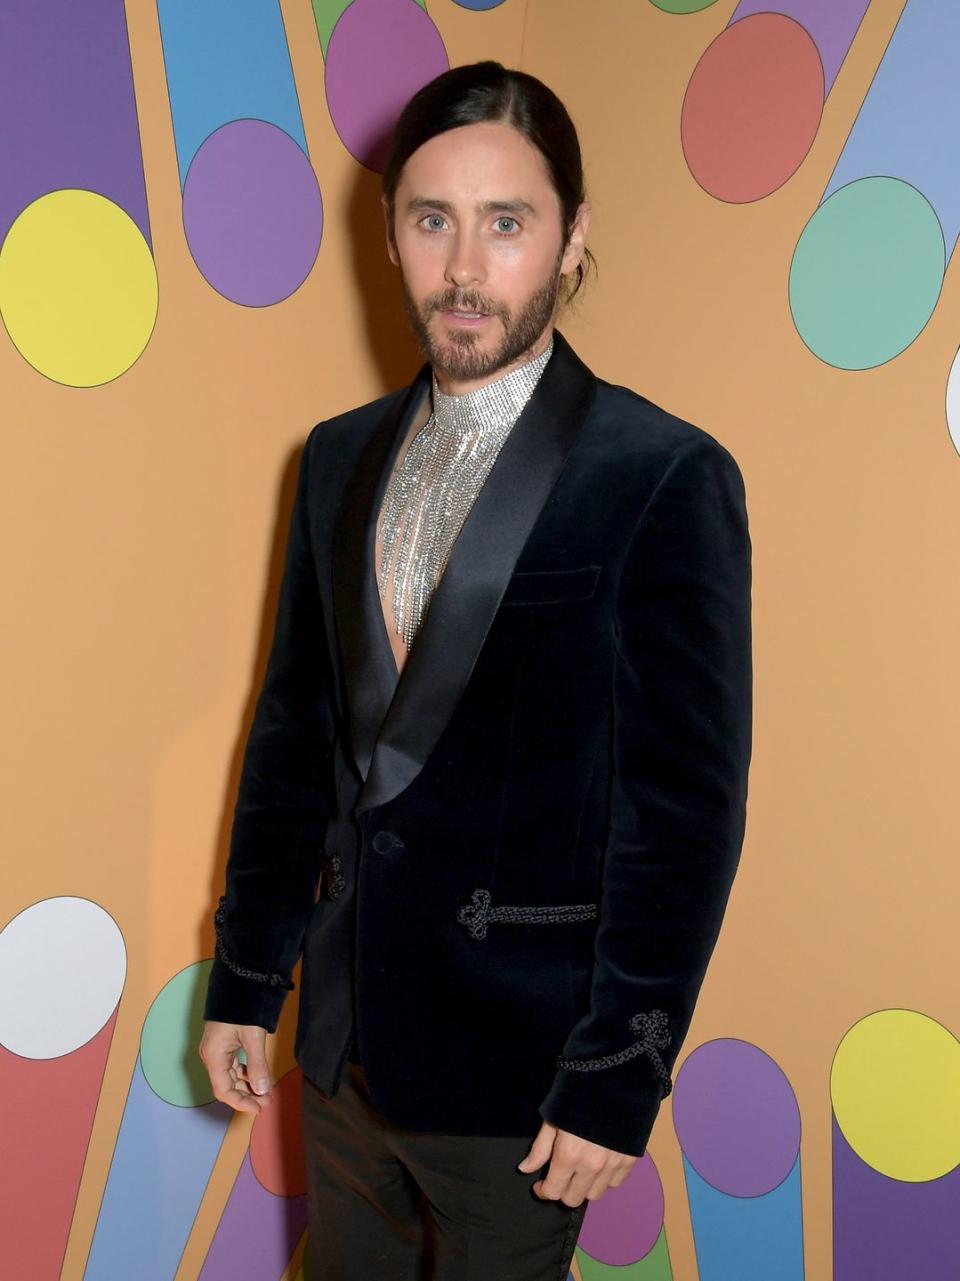 NOW: Jared Leto